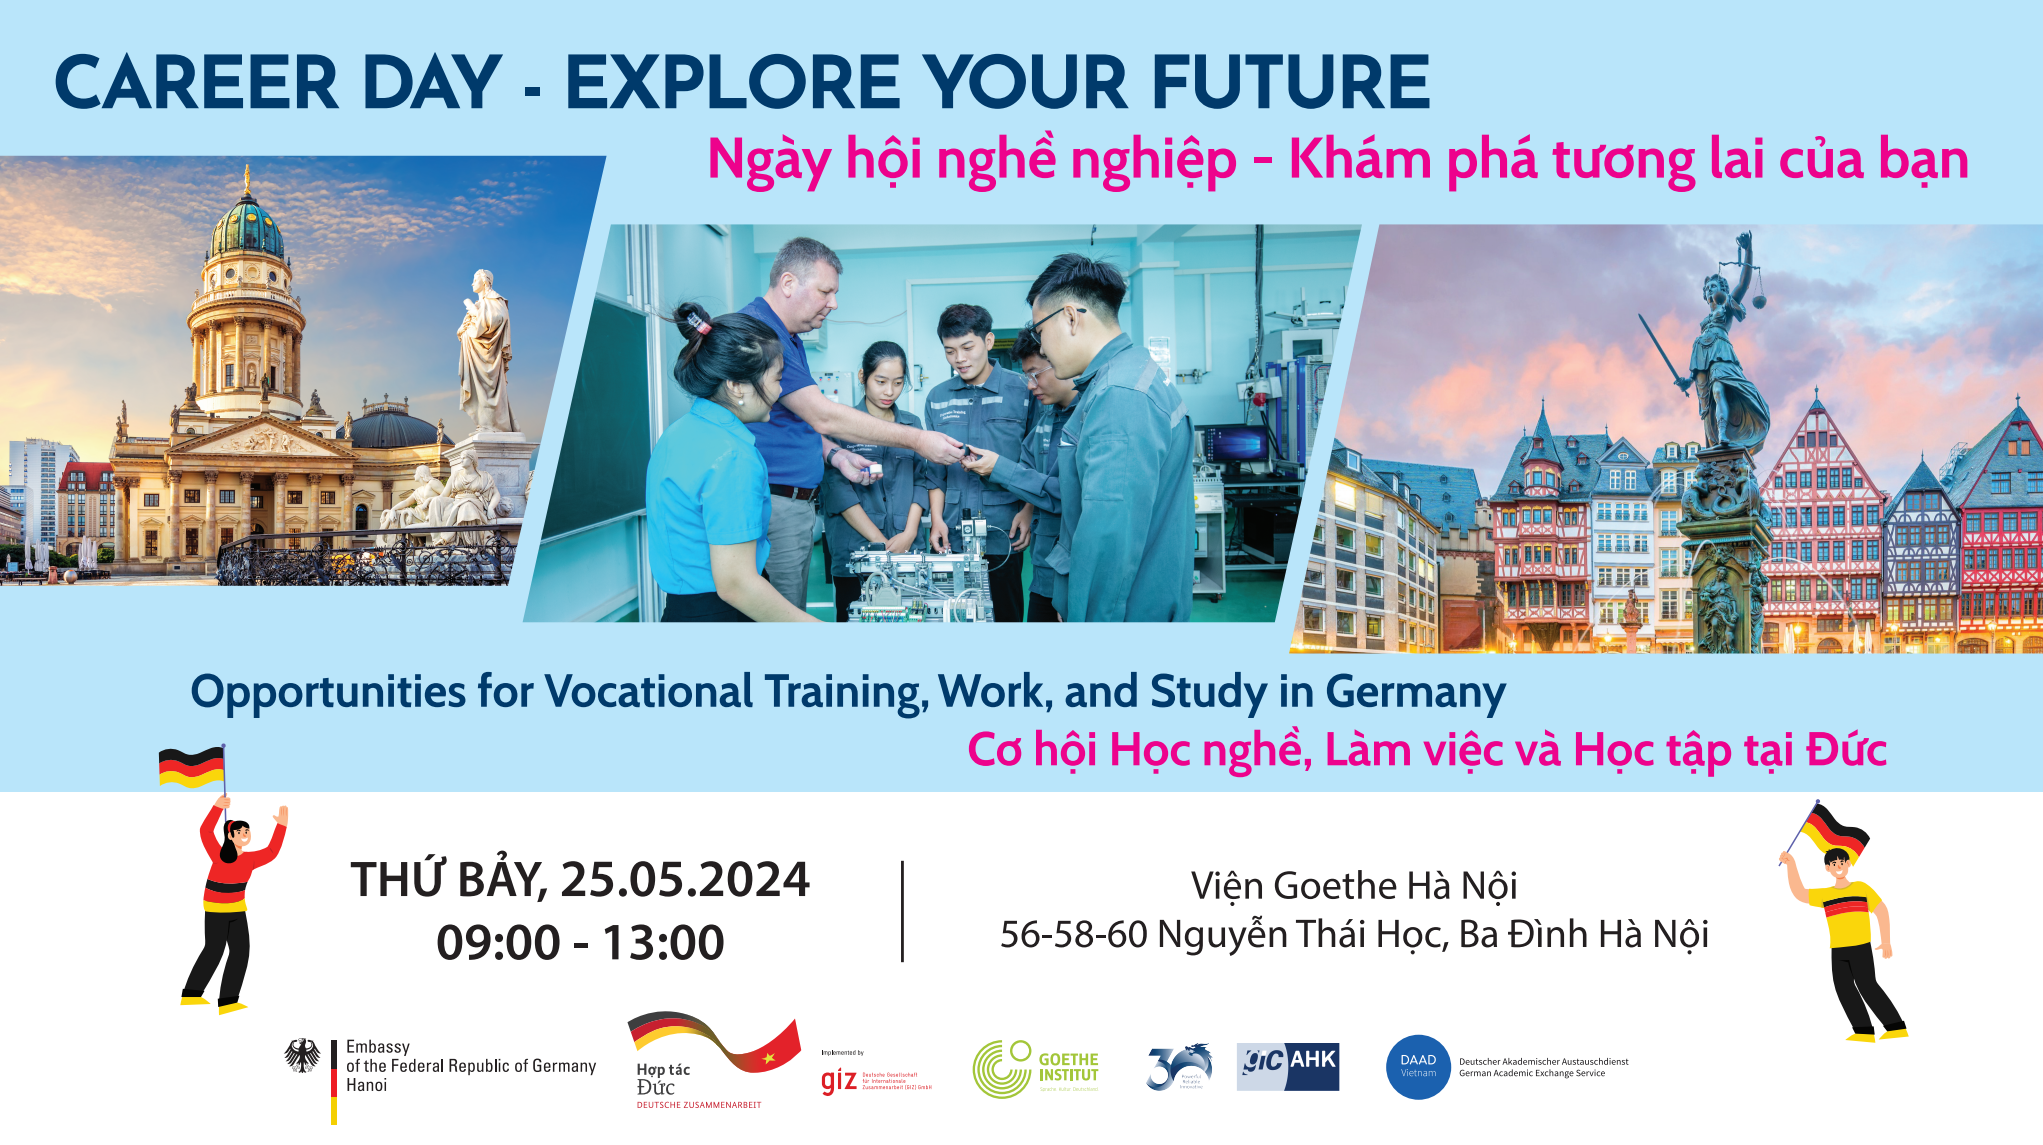 Hanoi event to showcase opportunities for vocational training, work, and study in Germany